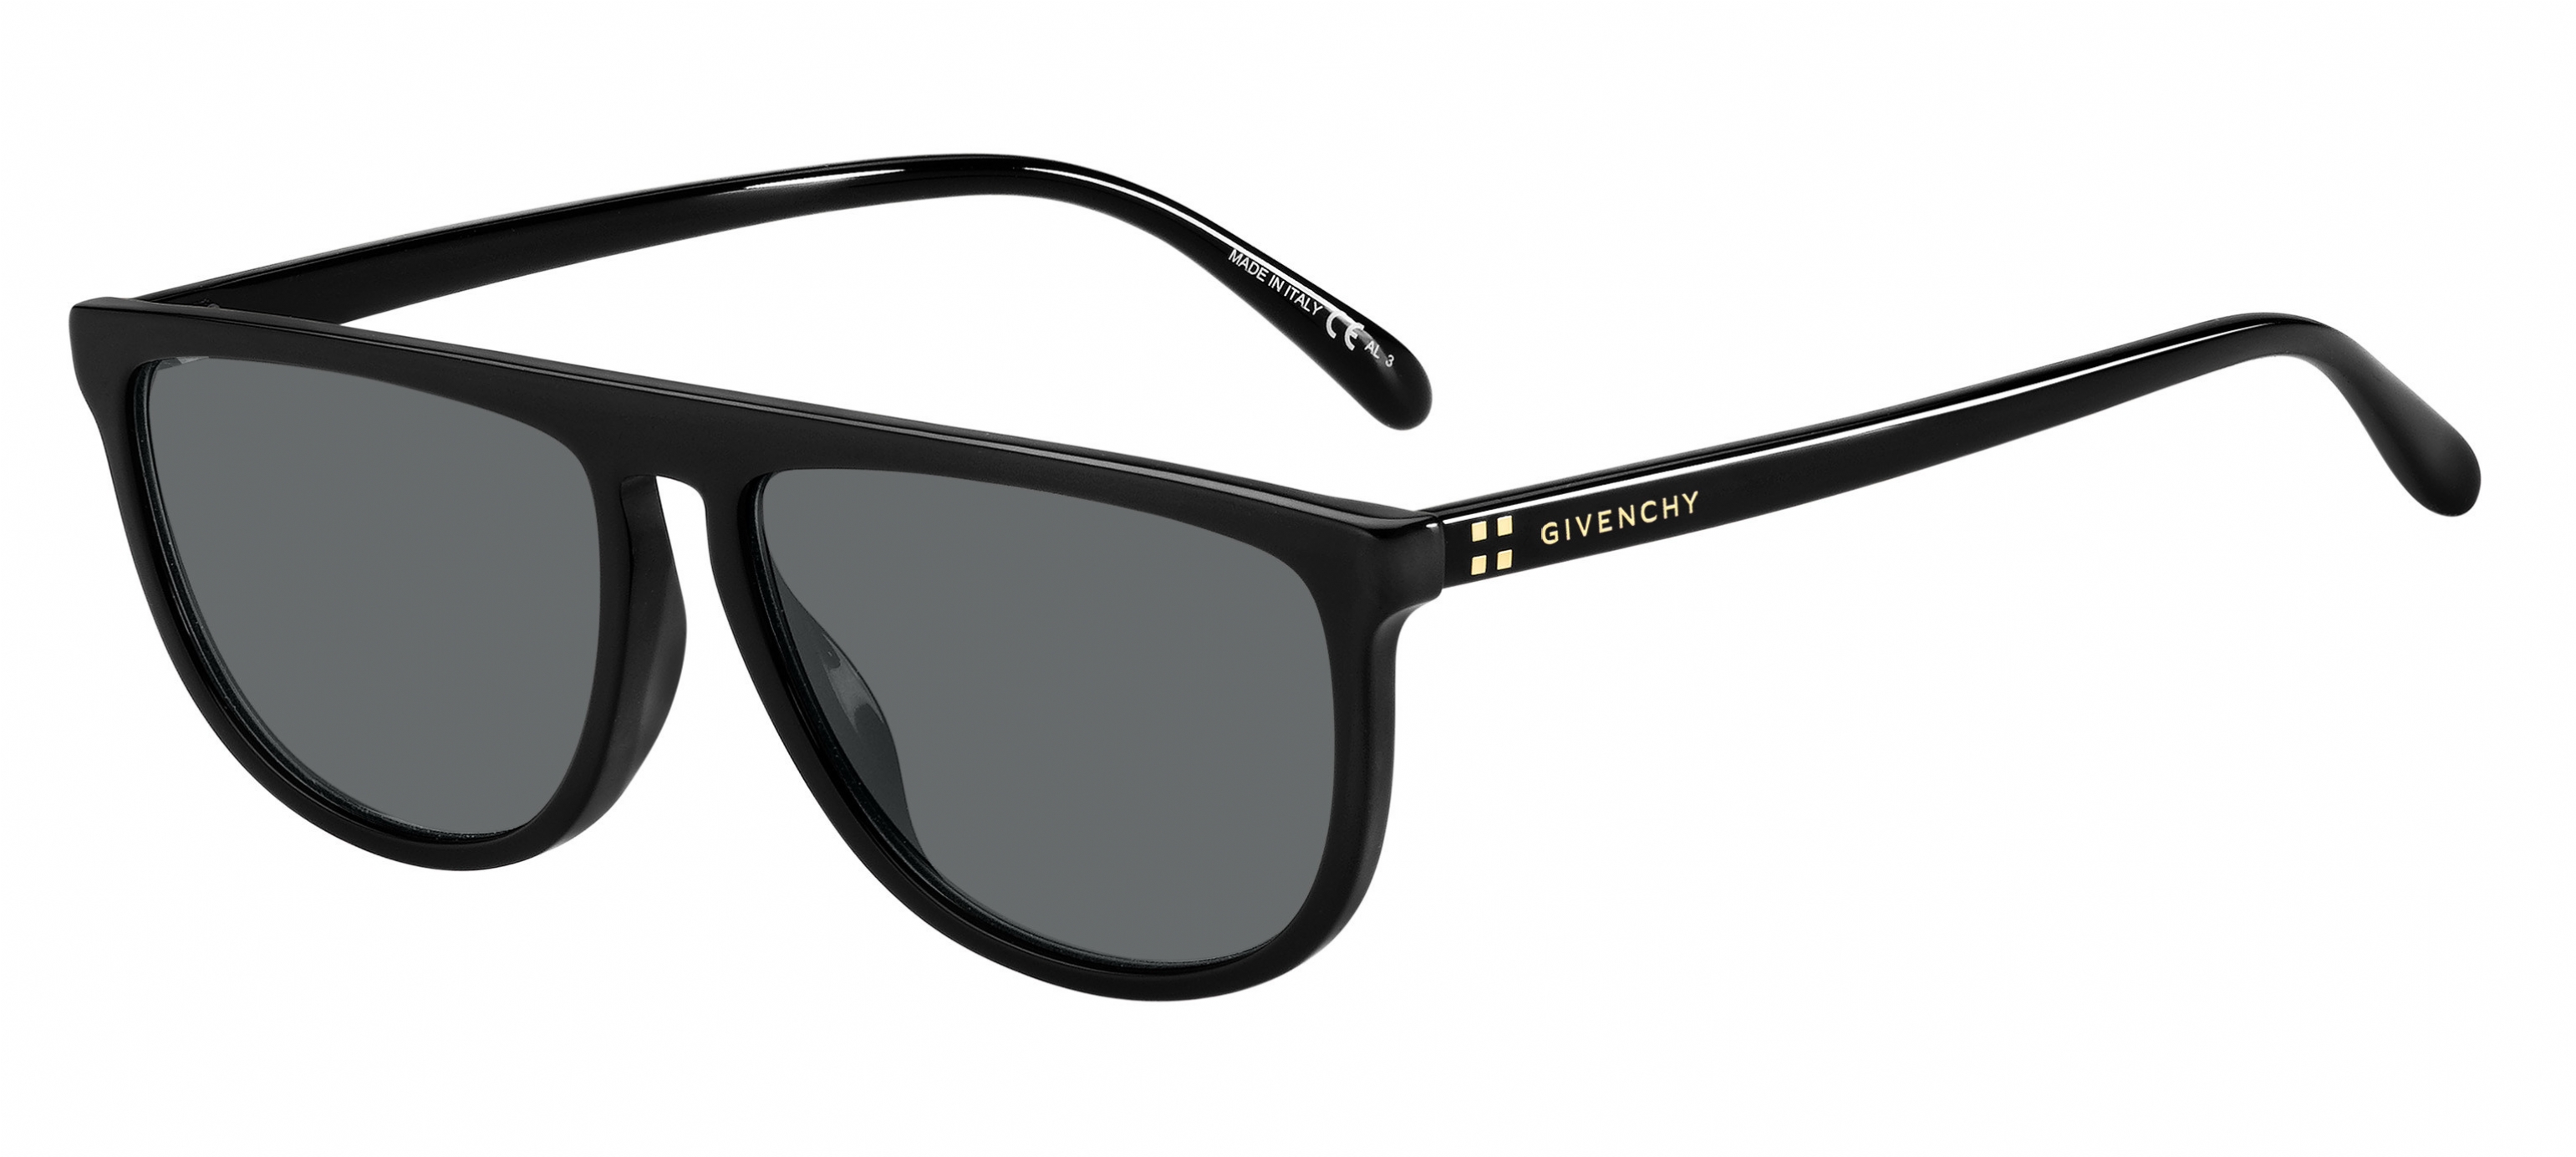 Buy Givenchy Sunglasses directly from OpticsFast.com